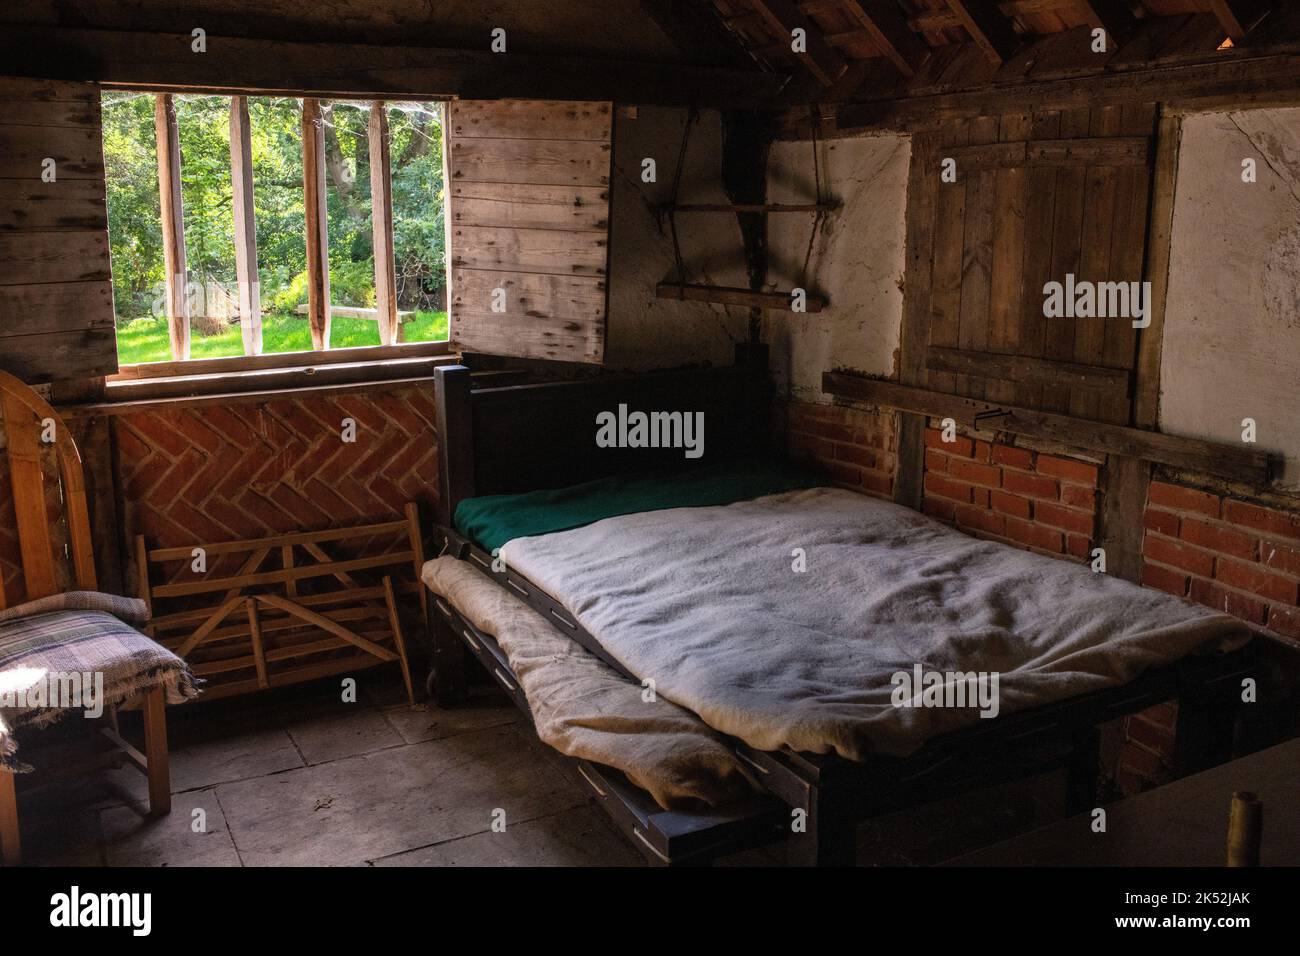 Interior and bed of a 1642 village house at Little Woodham, Gosport, England, the charity showing life at the start of the Civil War. Stock Photo